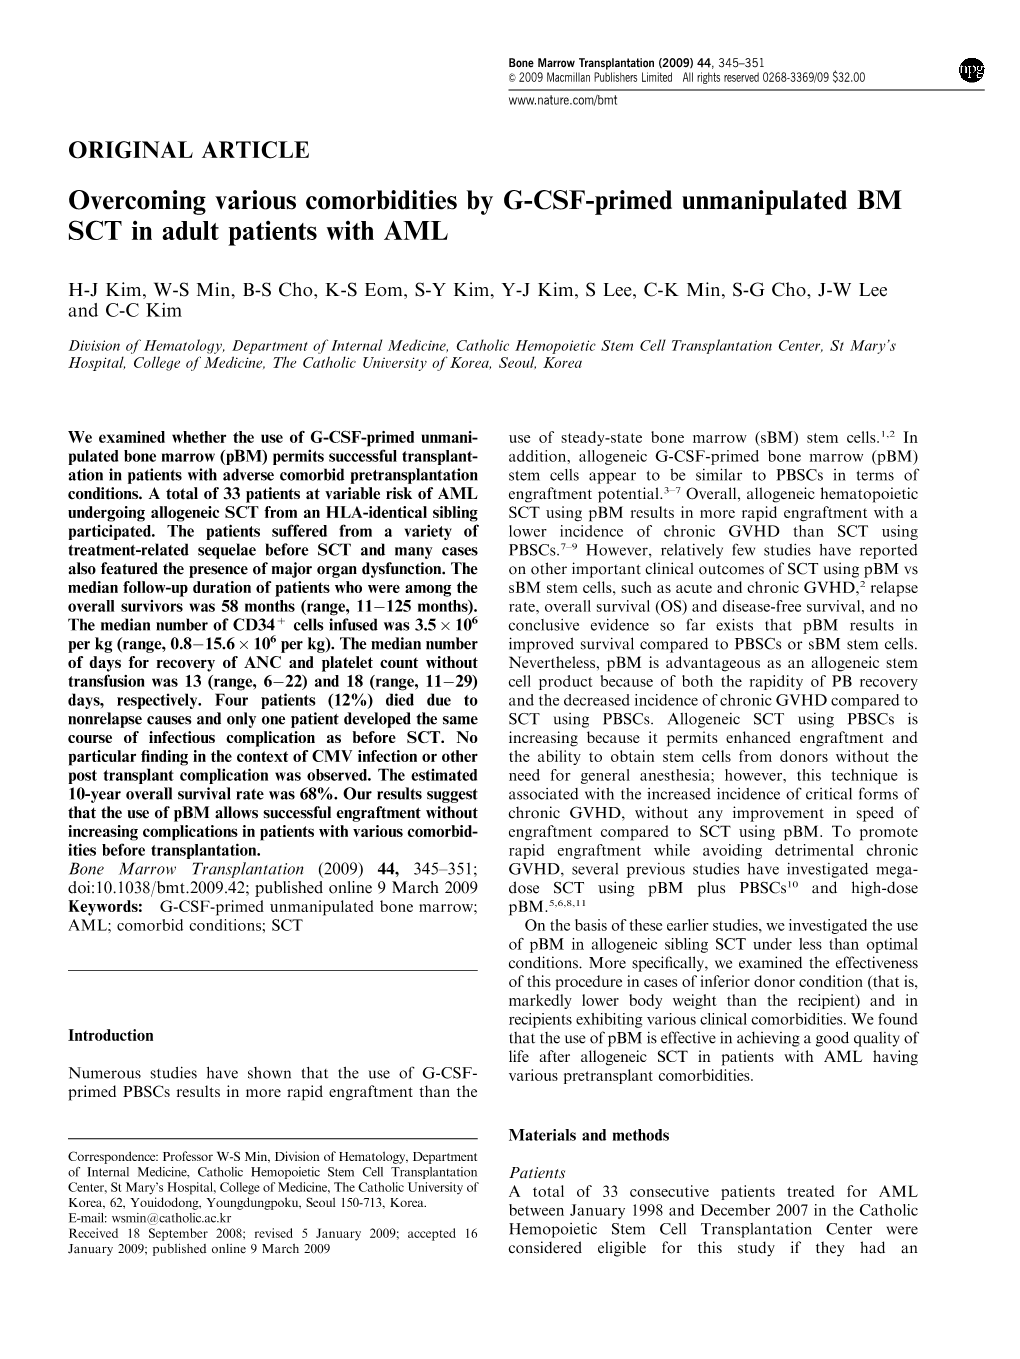 Overcoming Various Comorbidities by G-CSF-Primed Unmanipulated BM SCT in Adult Patients with AML